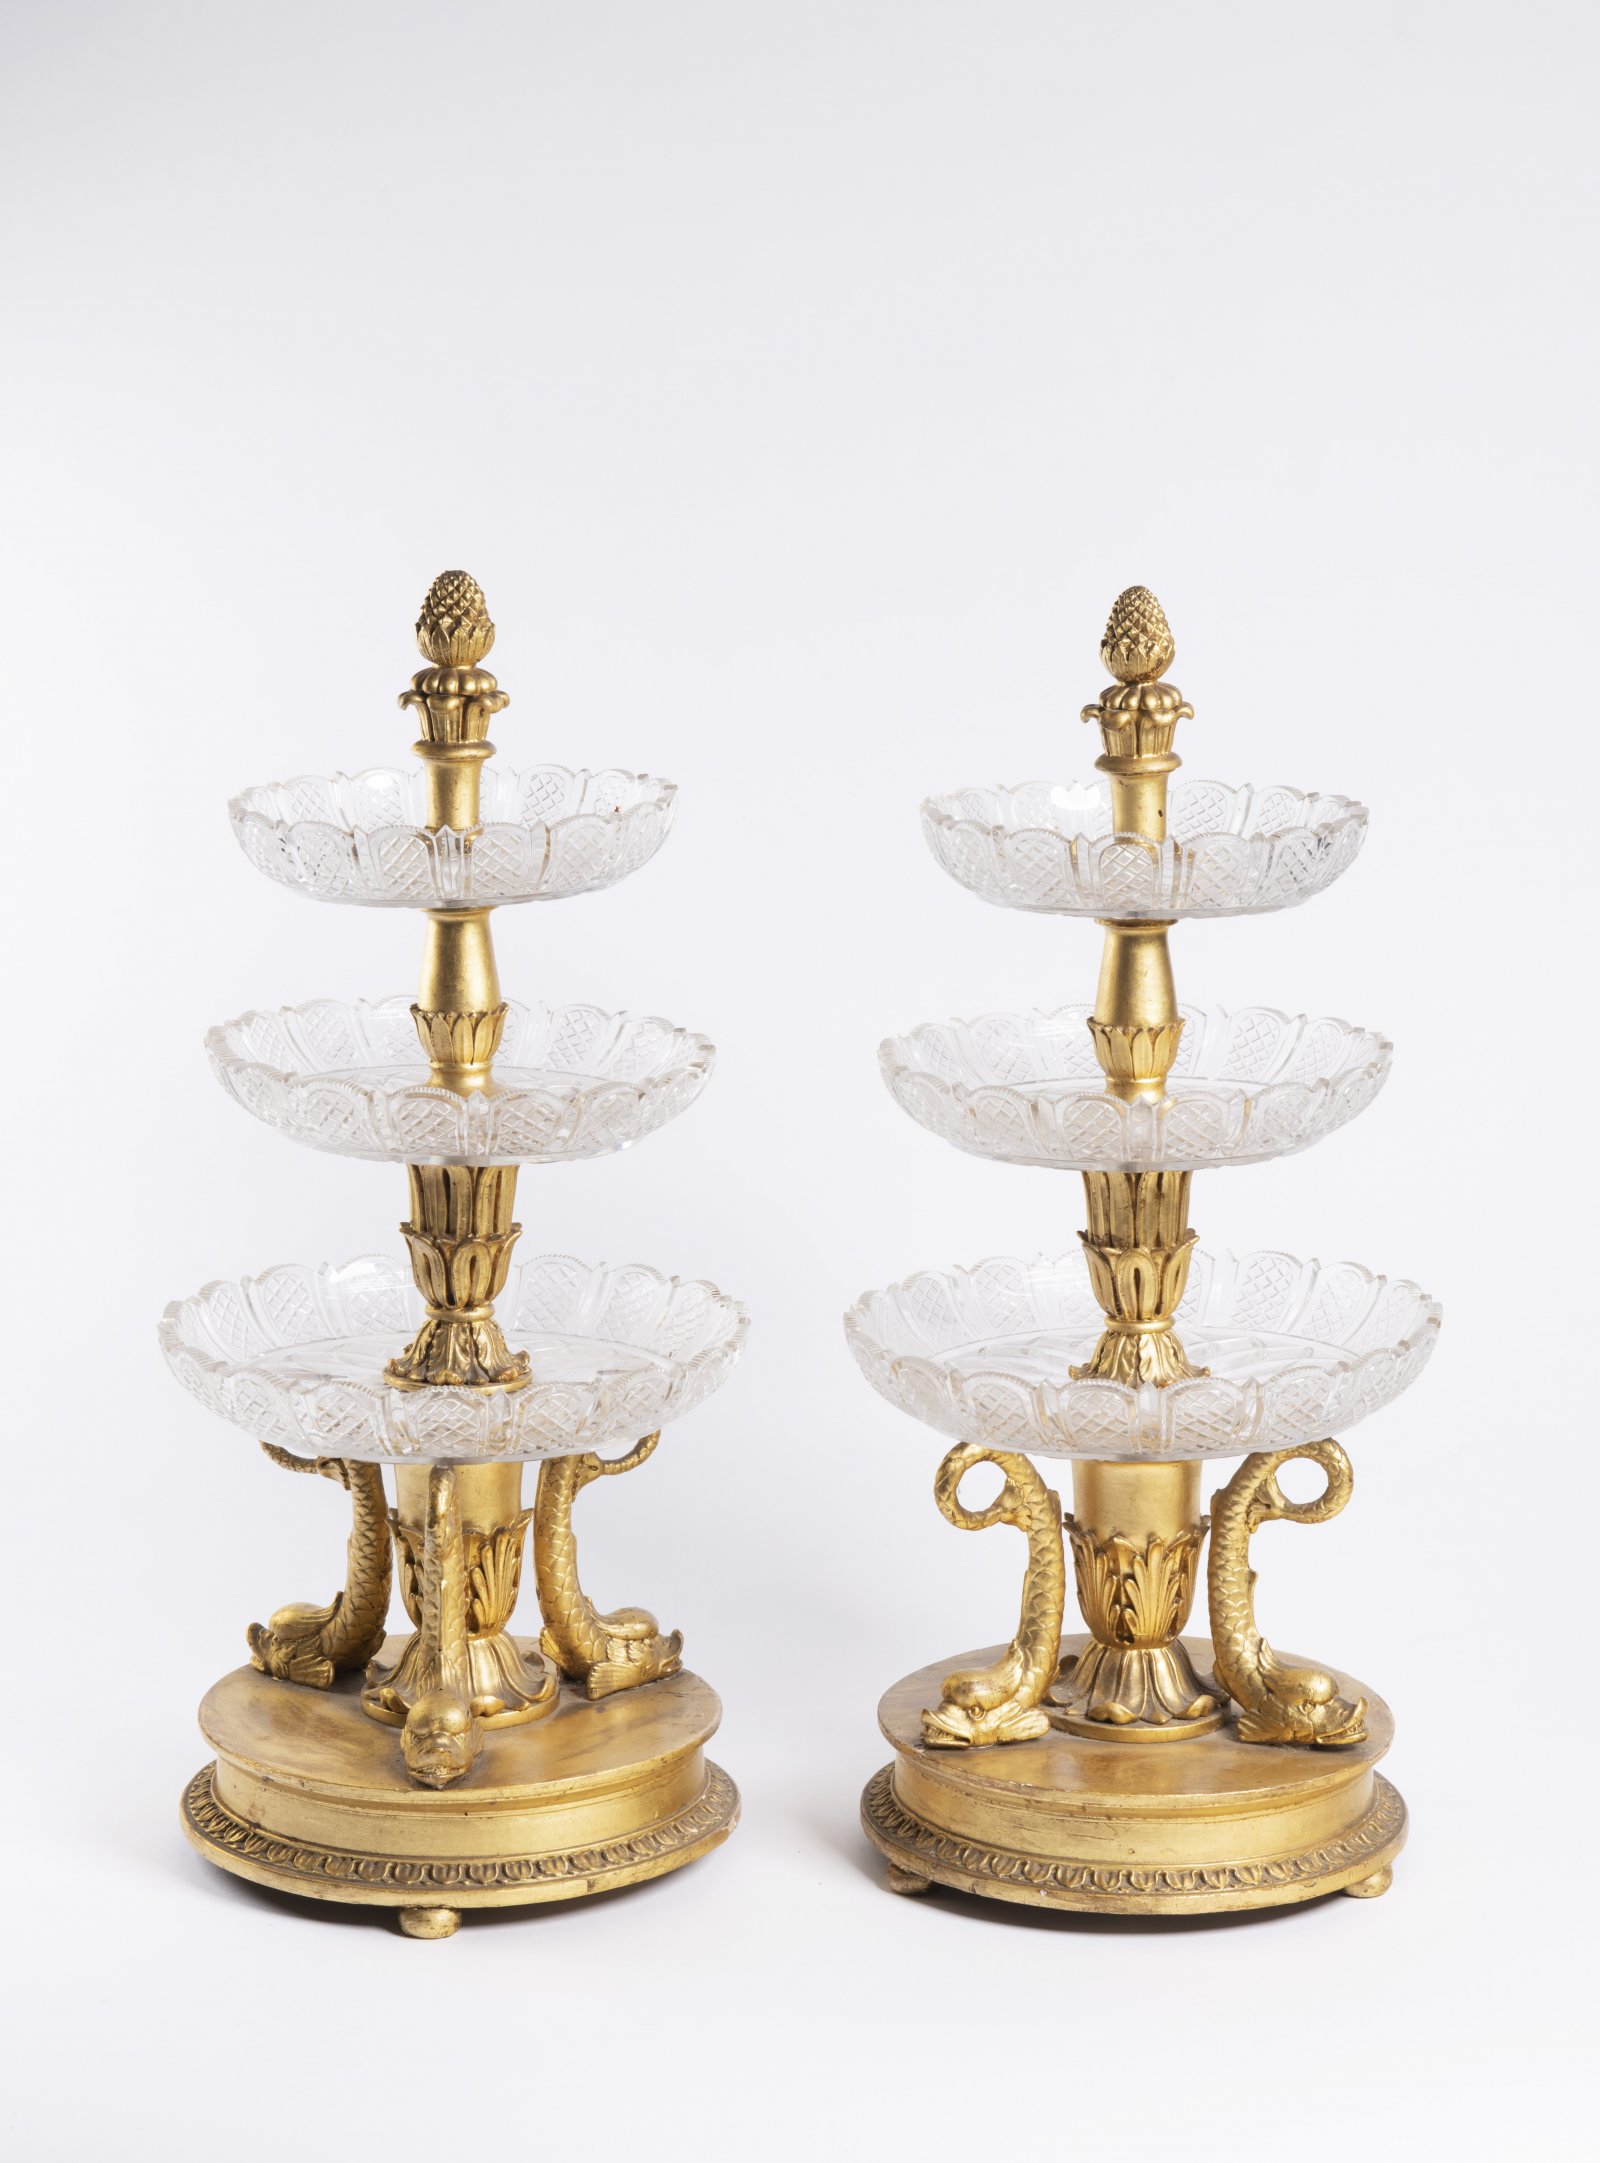 PAIRED EMPIRE ETAGERES Ca. 1800 Central Europe Gilded wood, cut glass 33,5 cm A pair of gilded